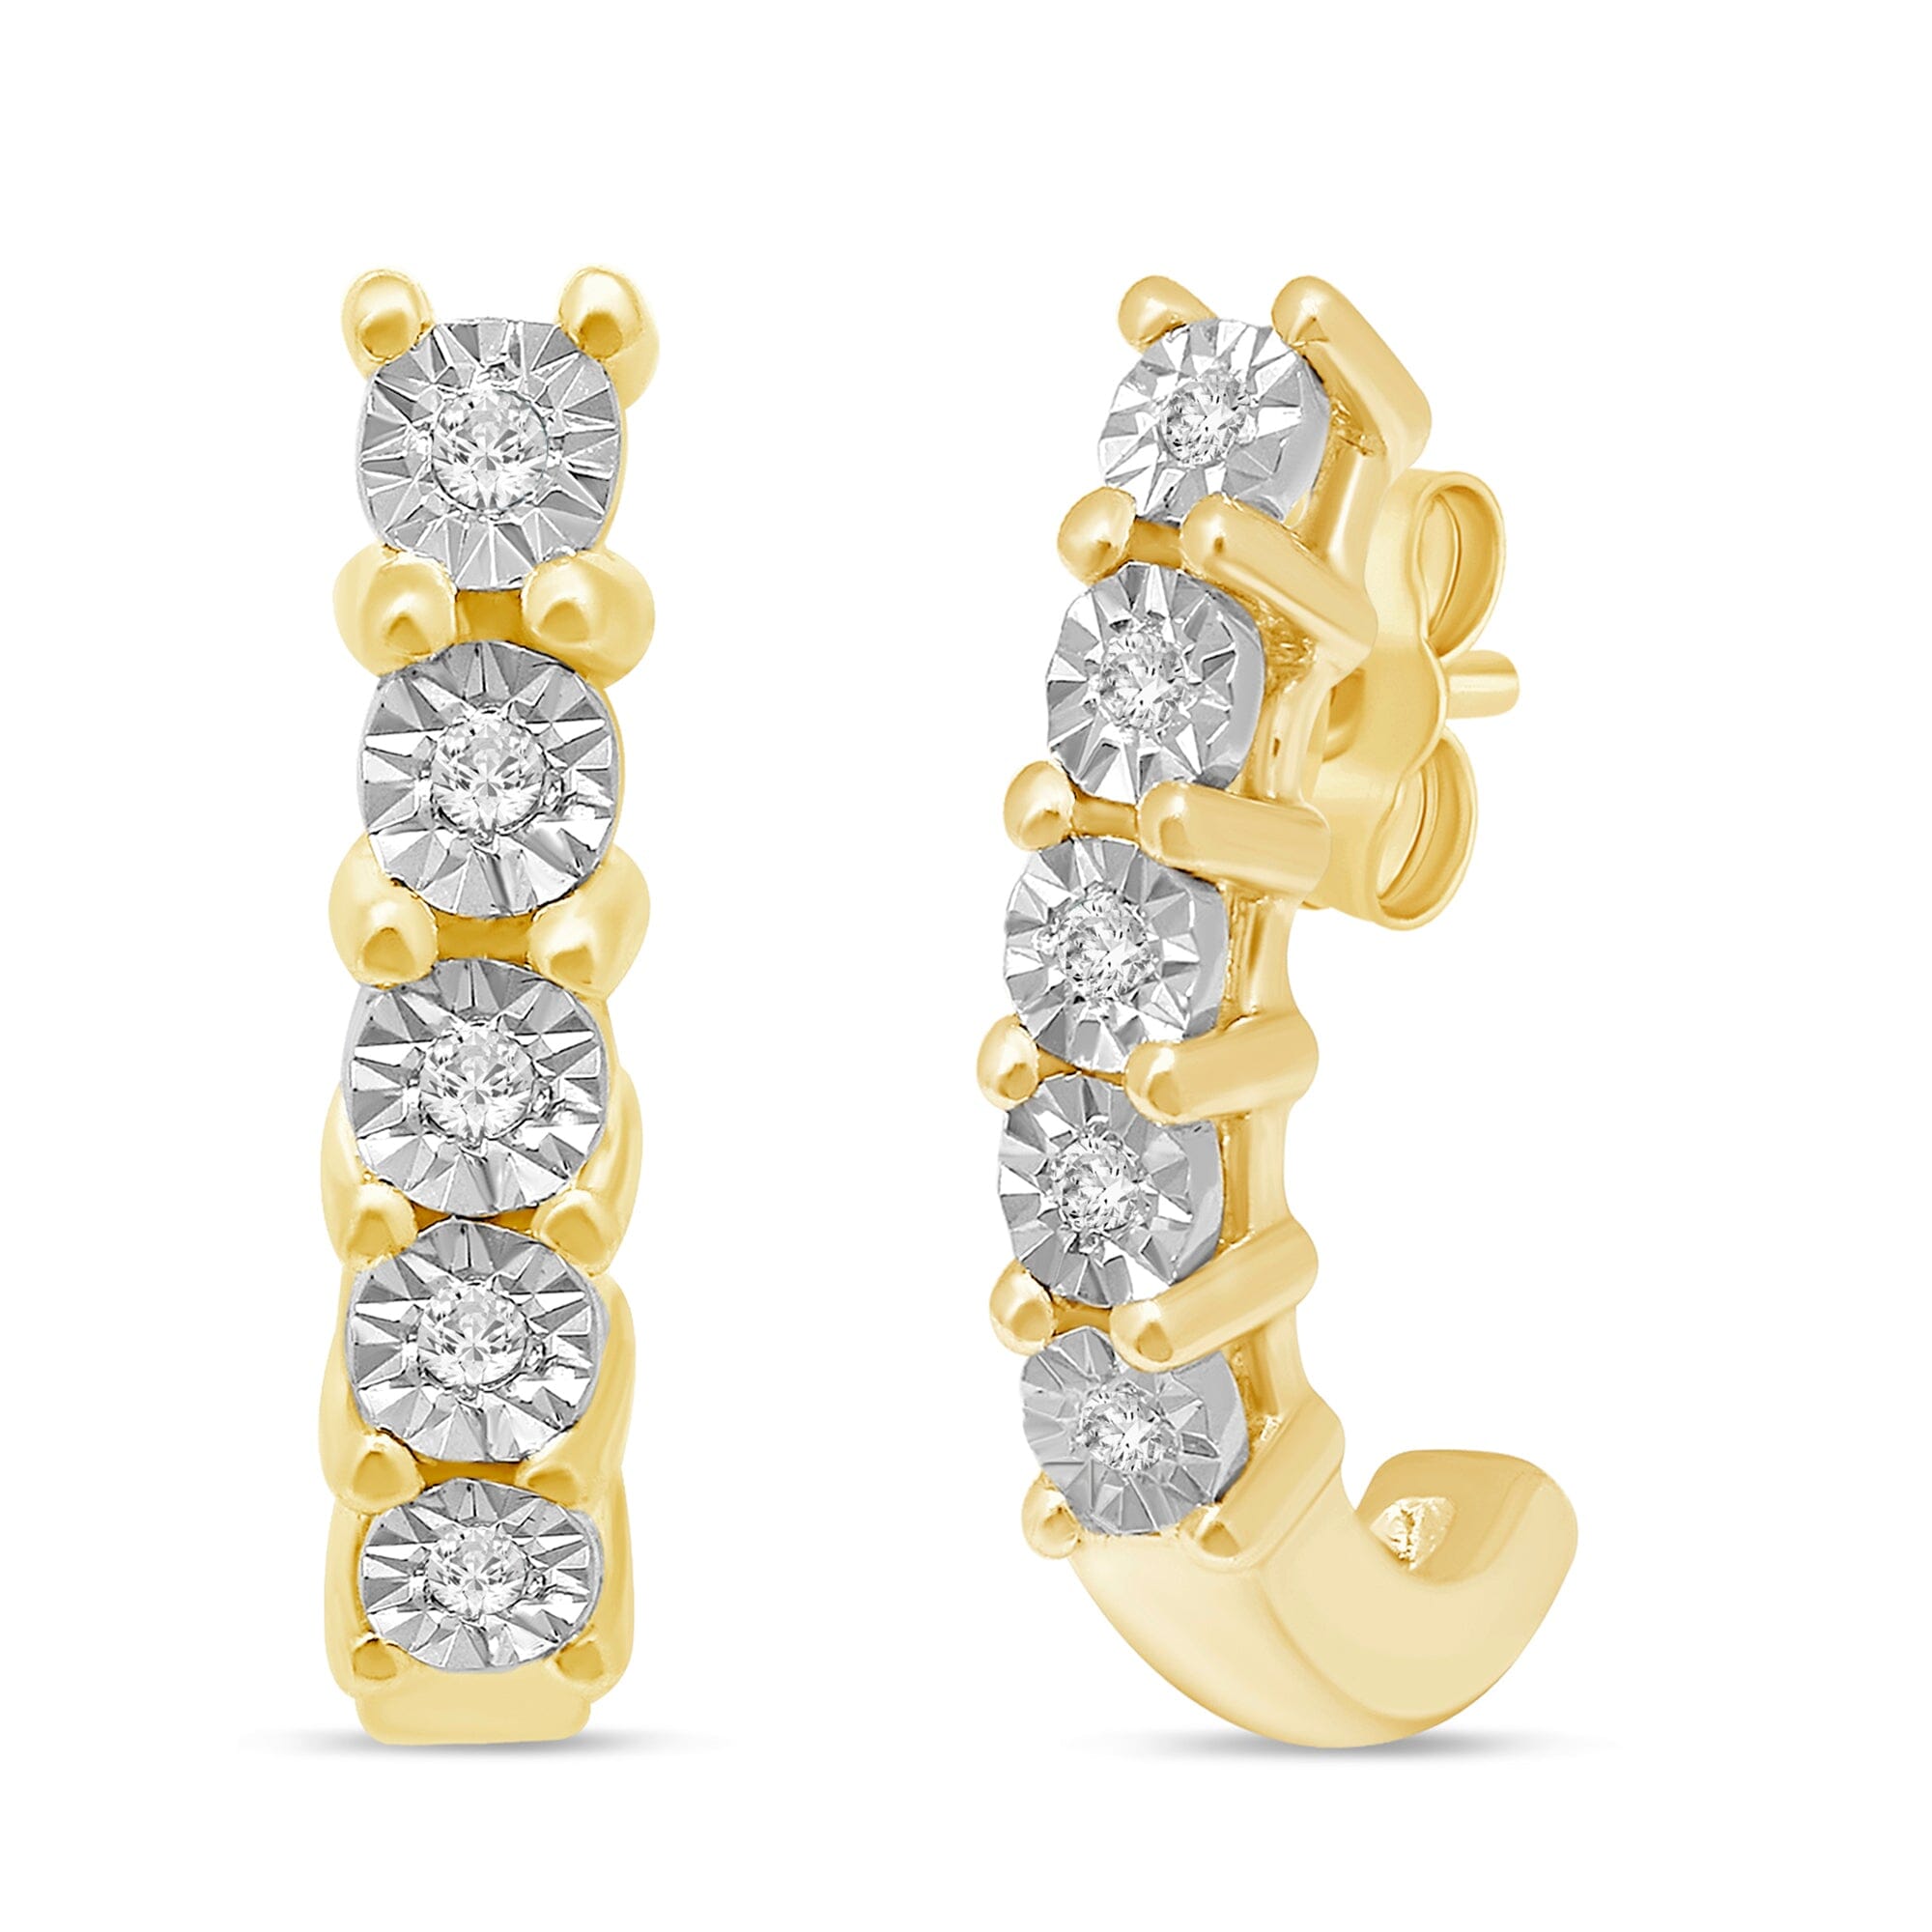 Hoop Station Earrings with 0.05ct of Diamonds in 9ct Yellow Gold Earrings Bevilles 